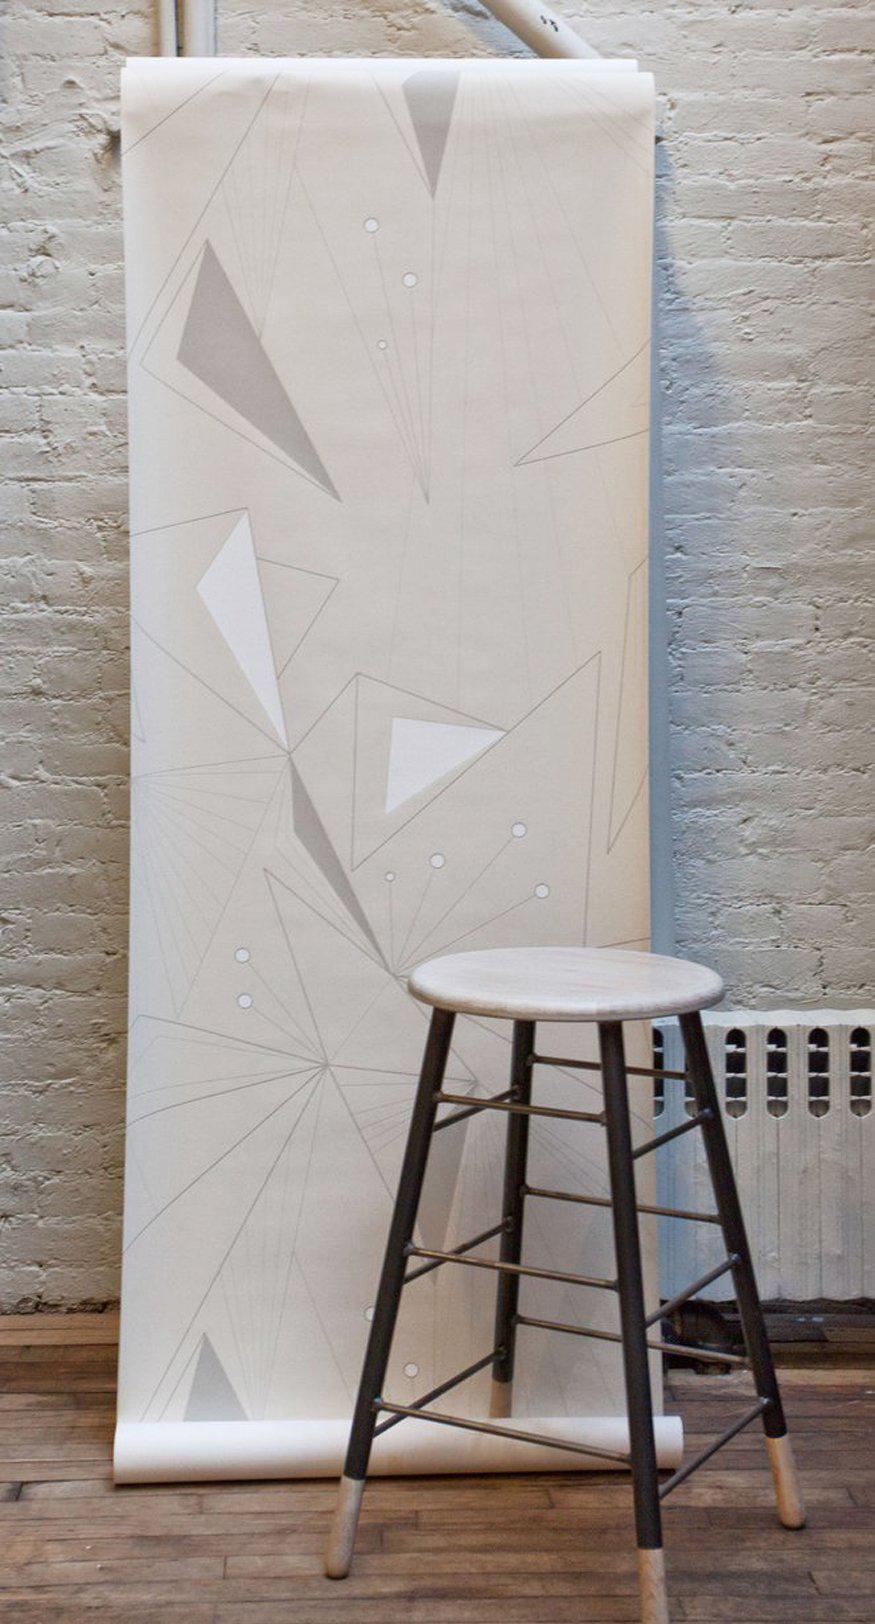 This modern and geometric wallpaper adds graphic warmth and texture to your walls in a soft color white on white palette of snow, stone gray and off-white. It works well with Mid-Century Modern, Hollywood Regency, Art Deco and contemporary